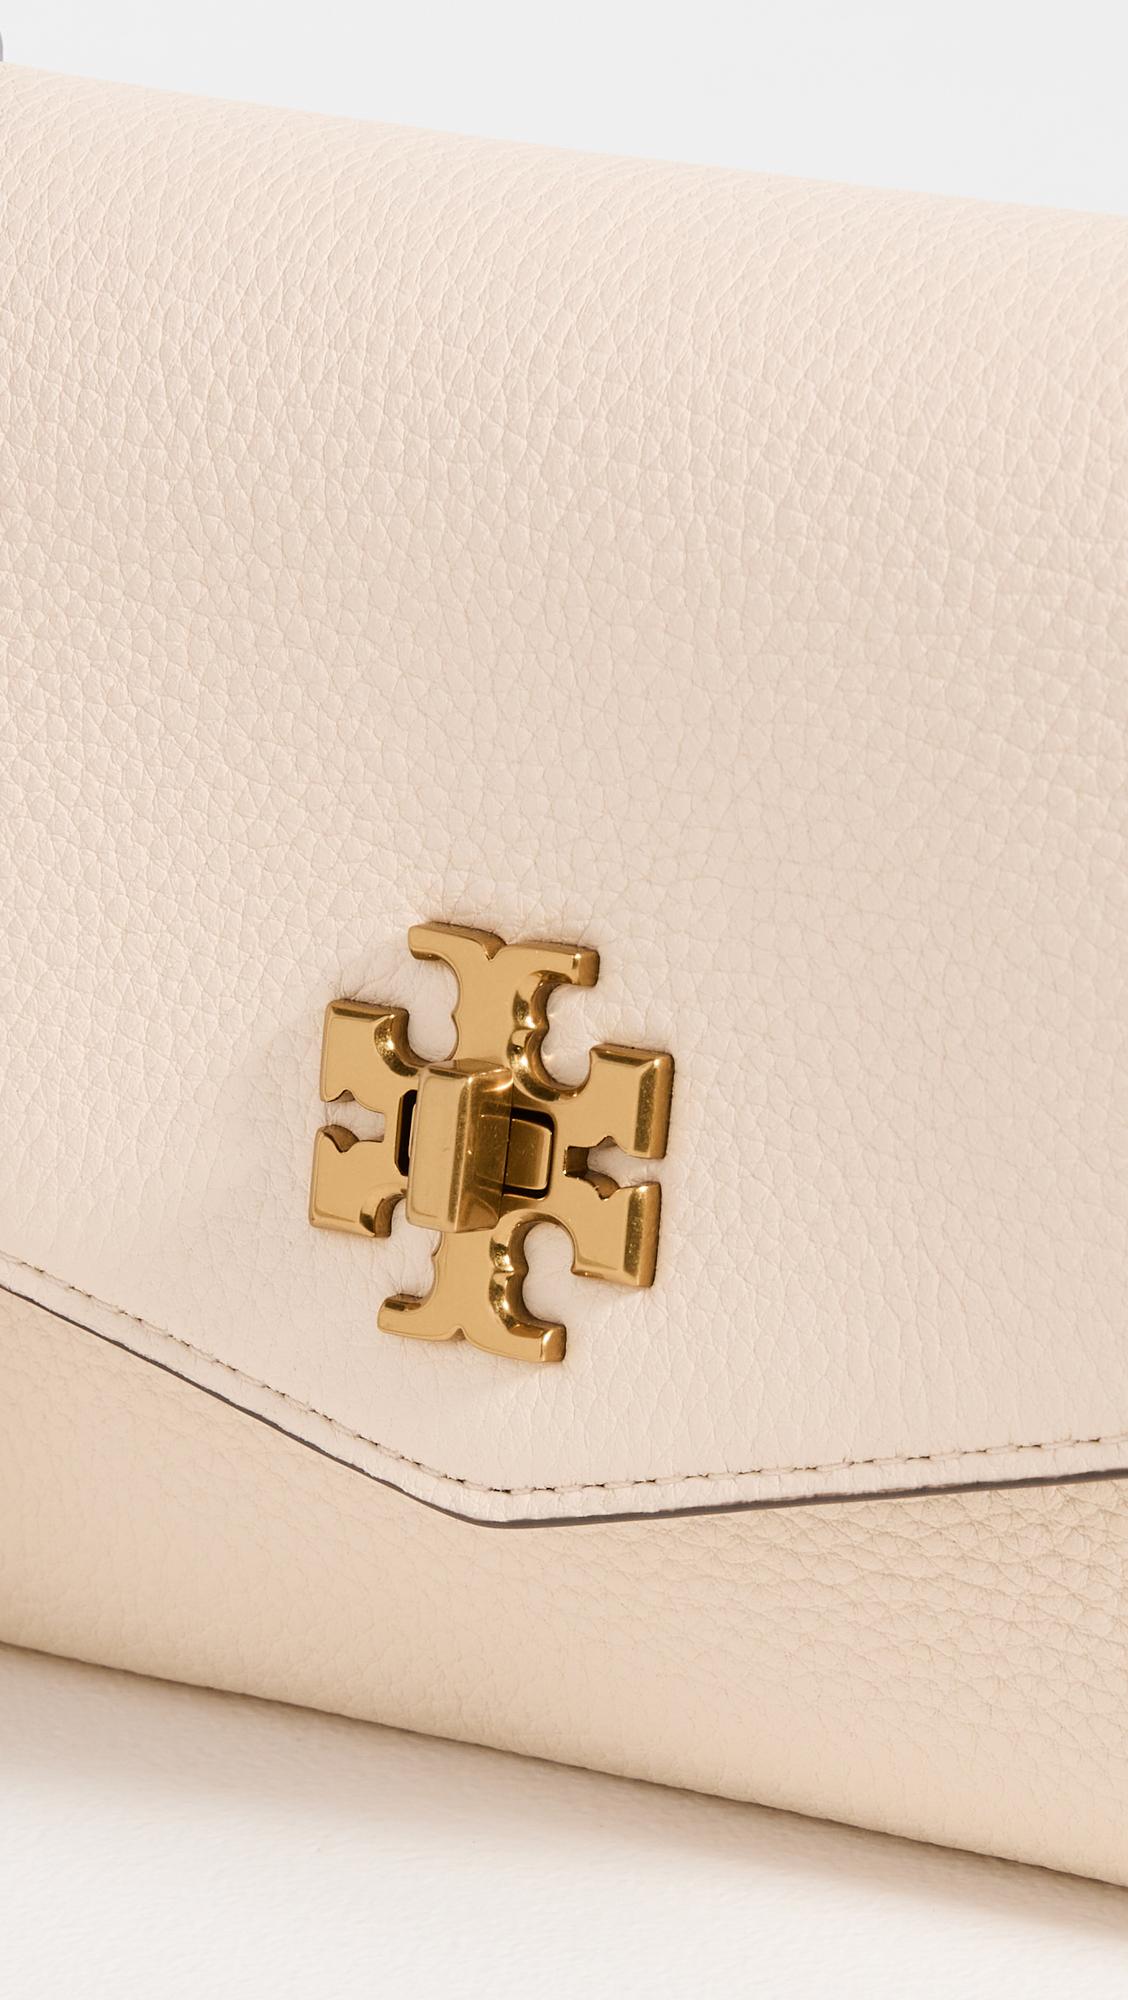 Tory Burch Kira Pebbled Leather Chain Wallet